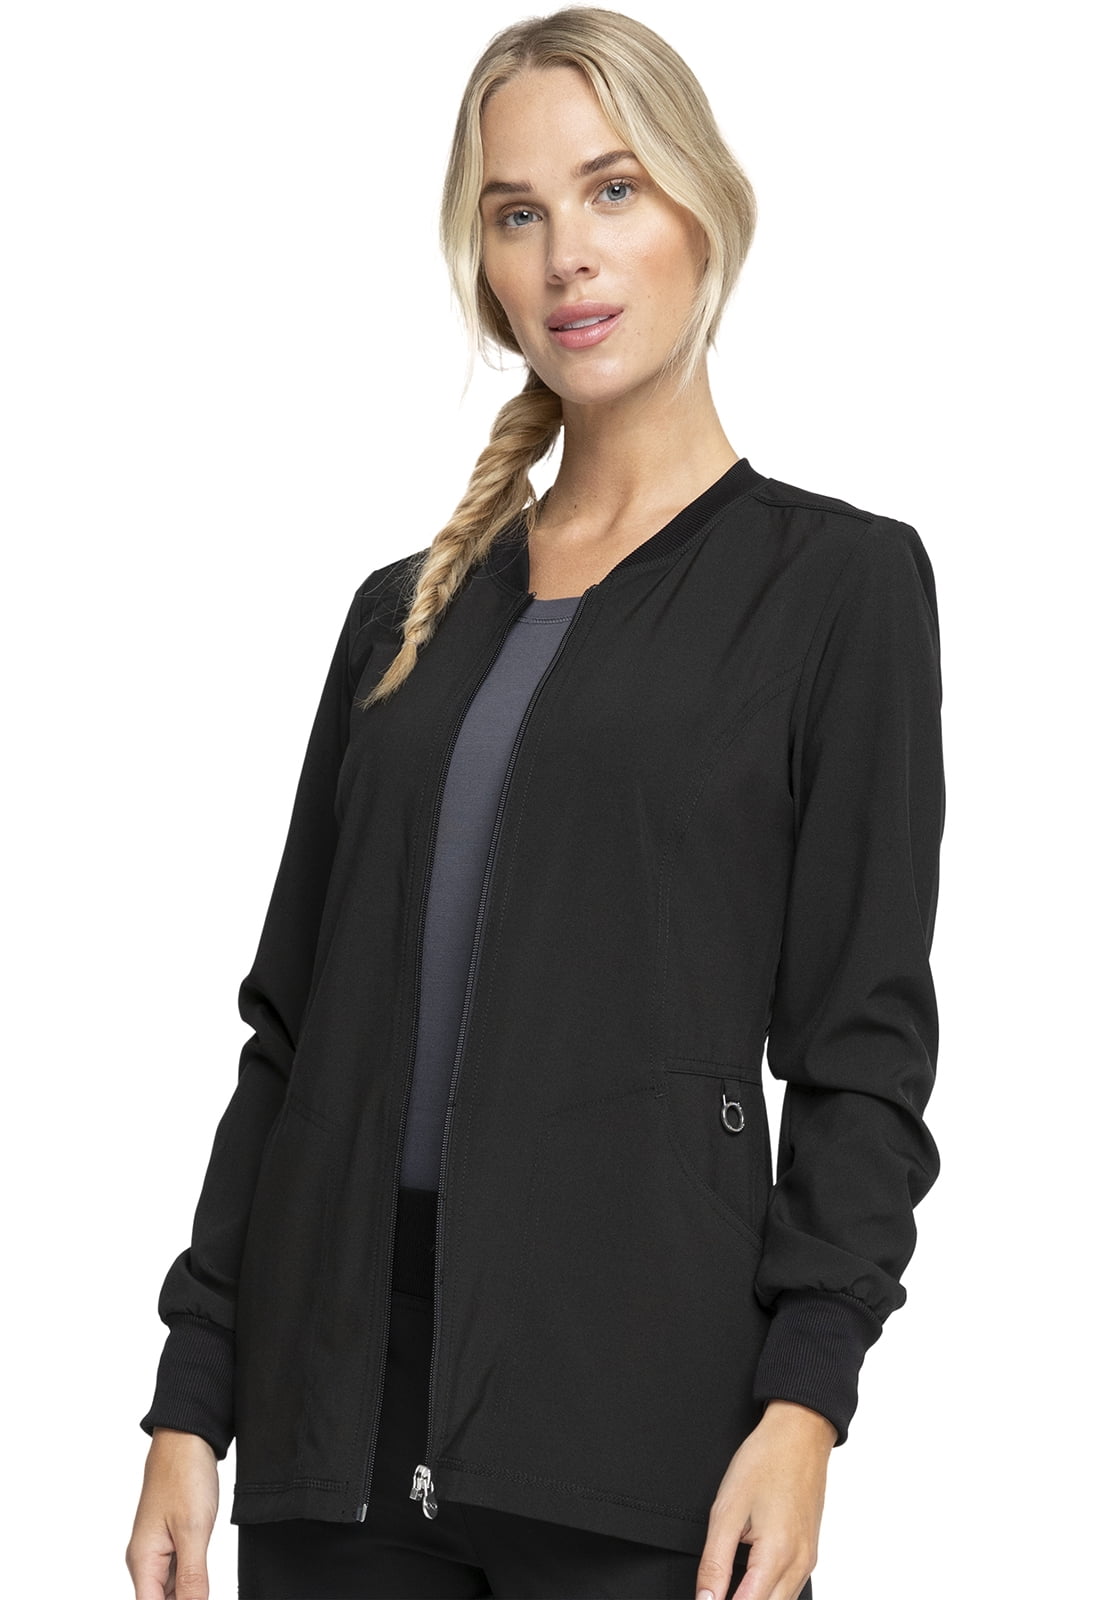 CK370A Cherokee Women's Long Sleeve Contemporary Fit Zip Front Warm-Up Jacket 